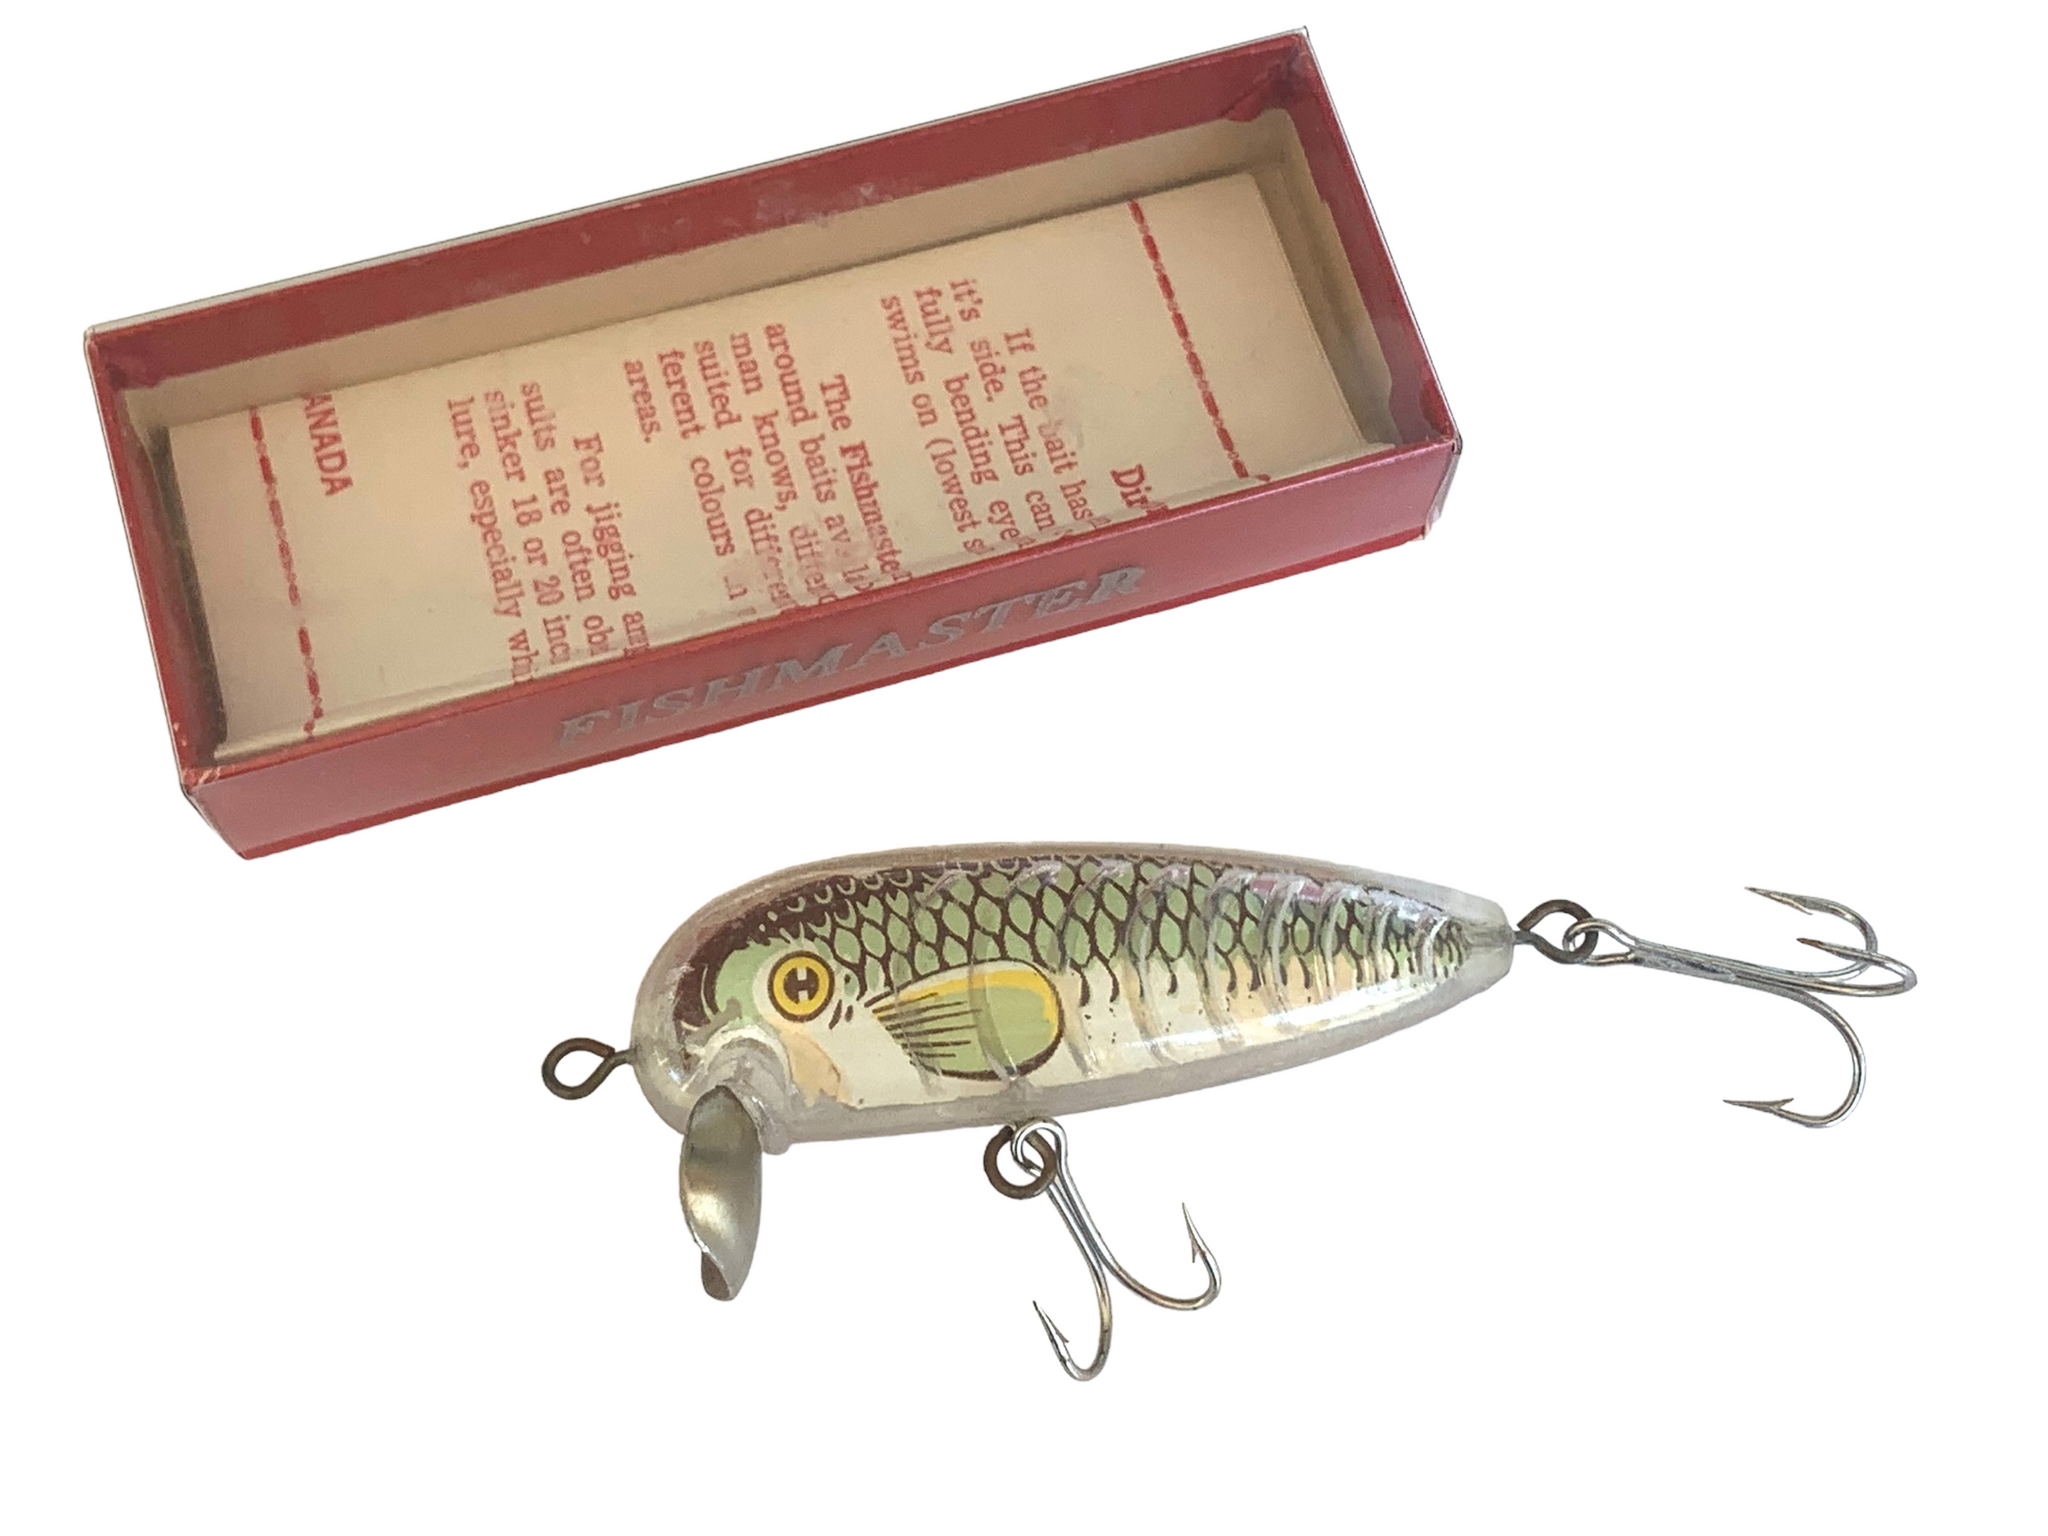 Ontario, Canada • NORTHERN BAIT THE FISHMASTER Fishing Lure • SHAD